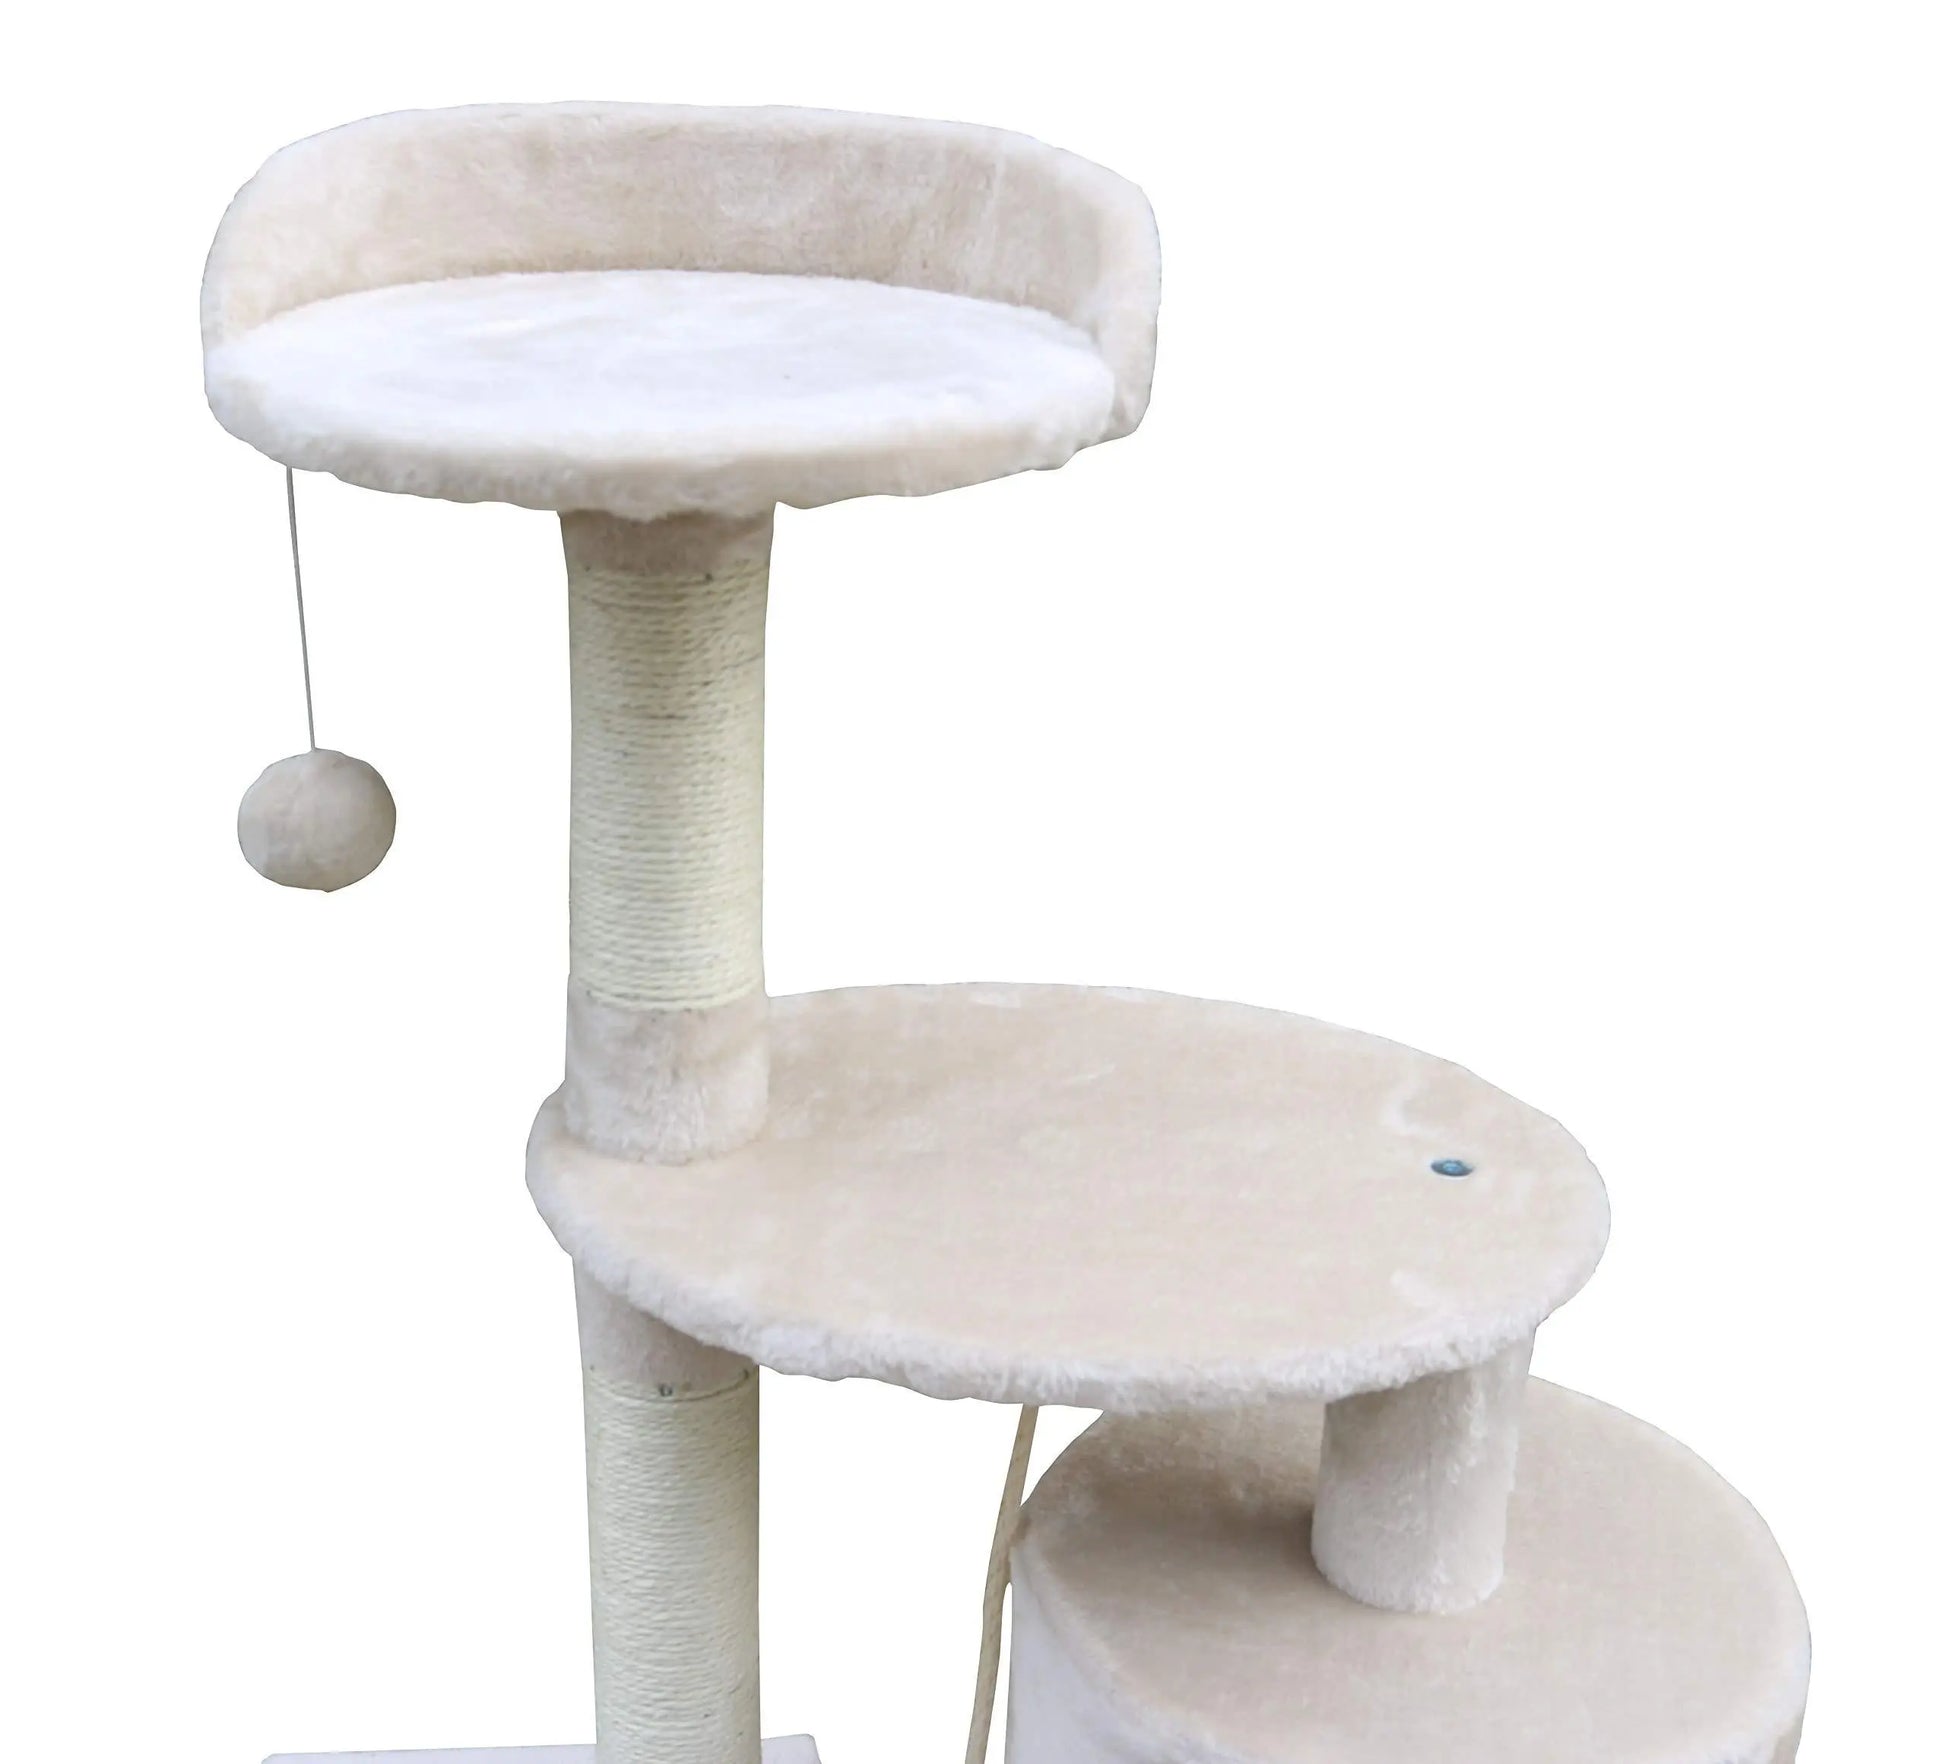 Callas RioAndMe Cat Tree Toy with 4 Platforms Rope and Scratching Post (Beige, 44 Inches , Cat4711W) Amanpetshop